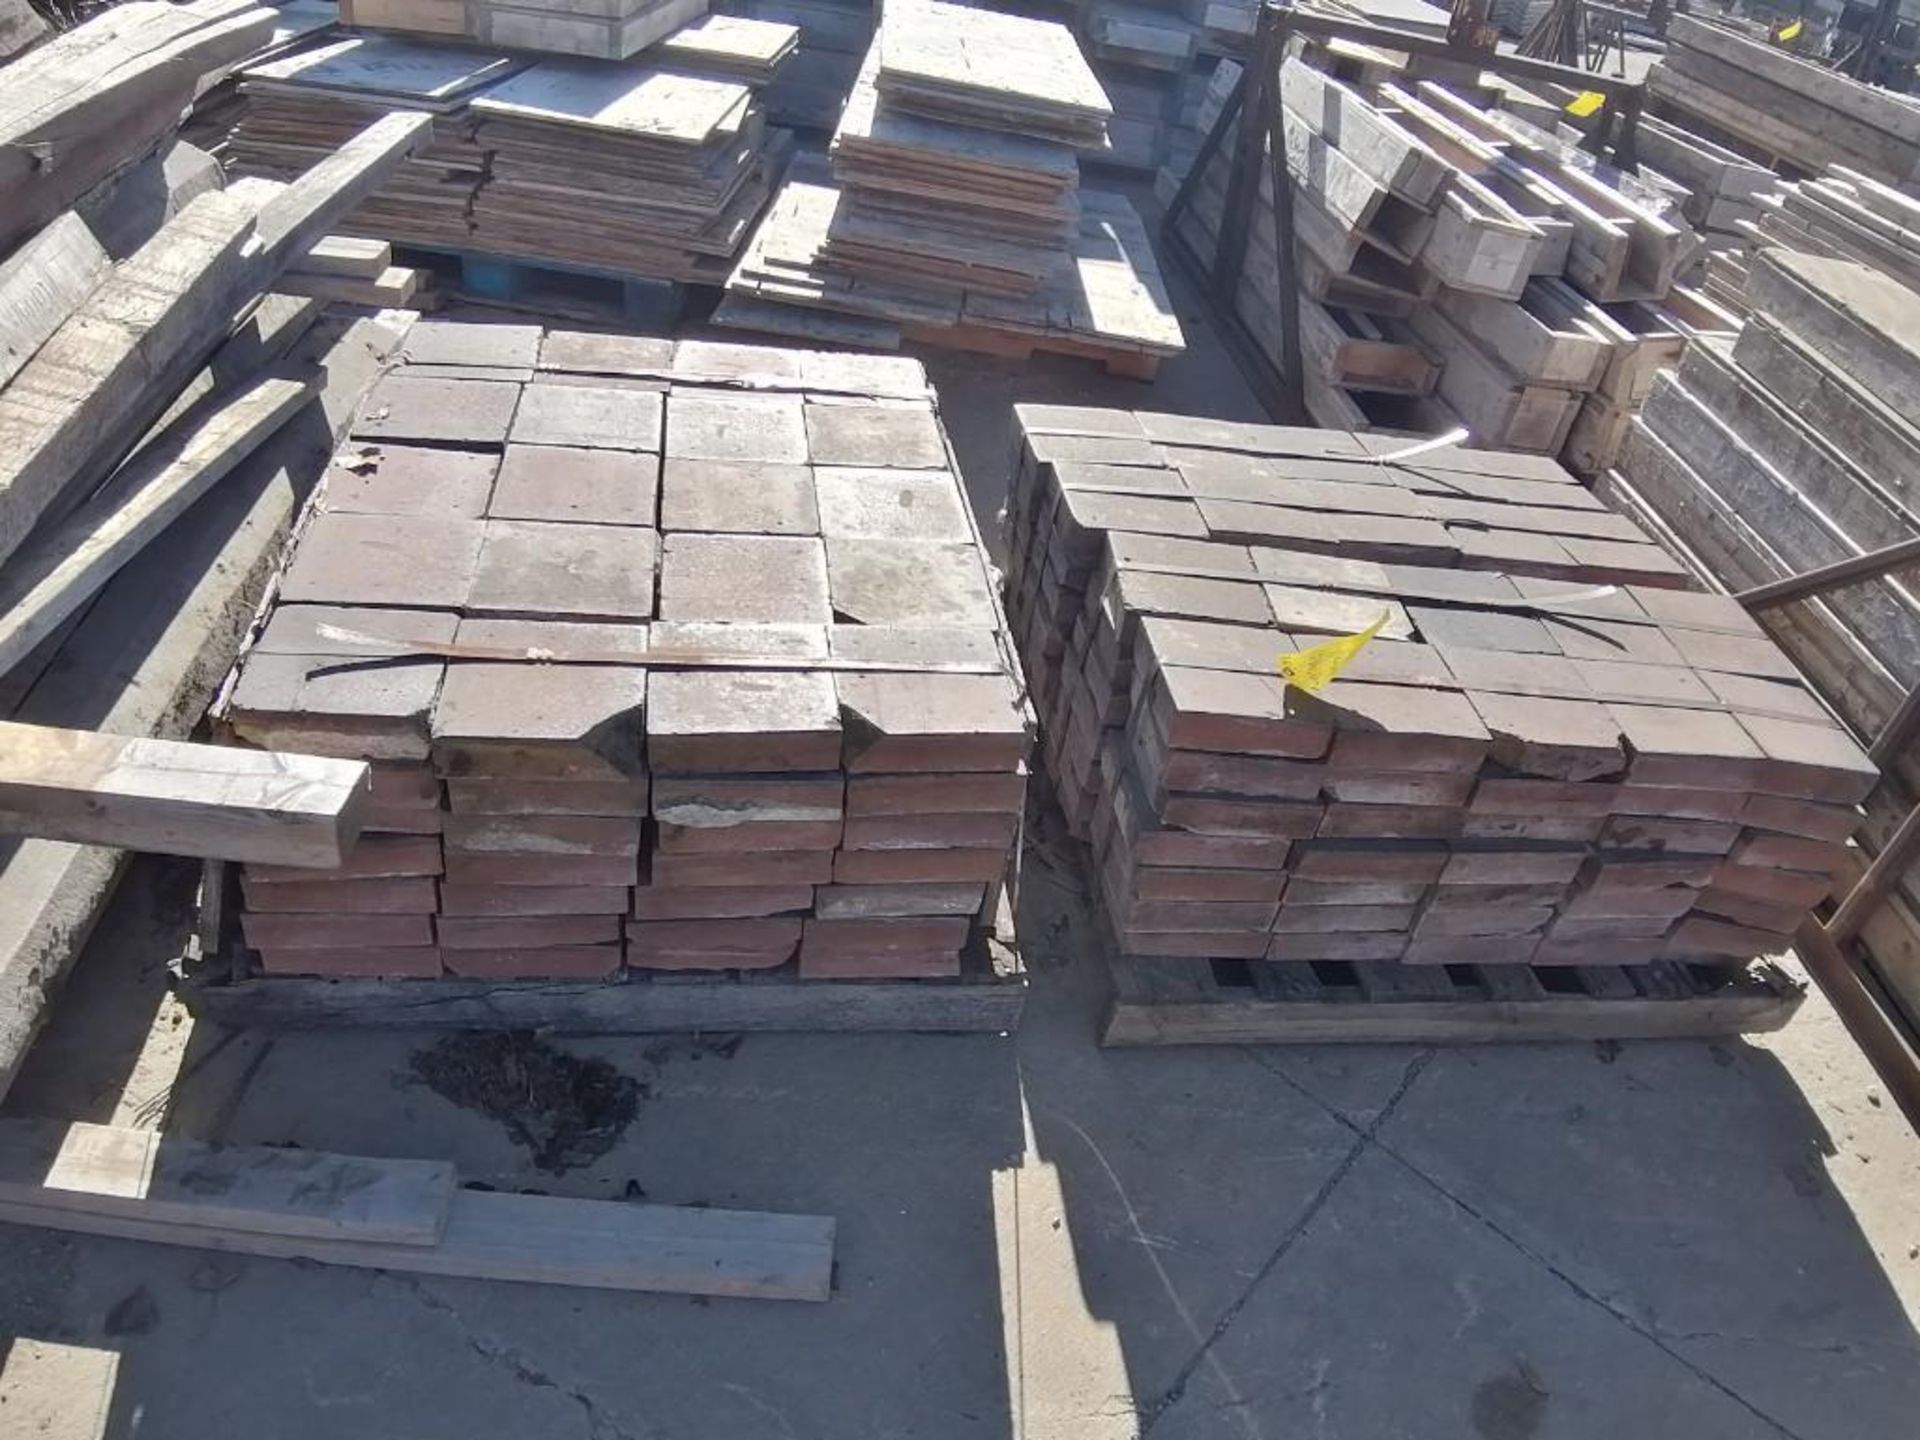 Lot of (2) Pallets with 280 total 8" x 8" Paving Bricks. Located in Hazelwood, MO.